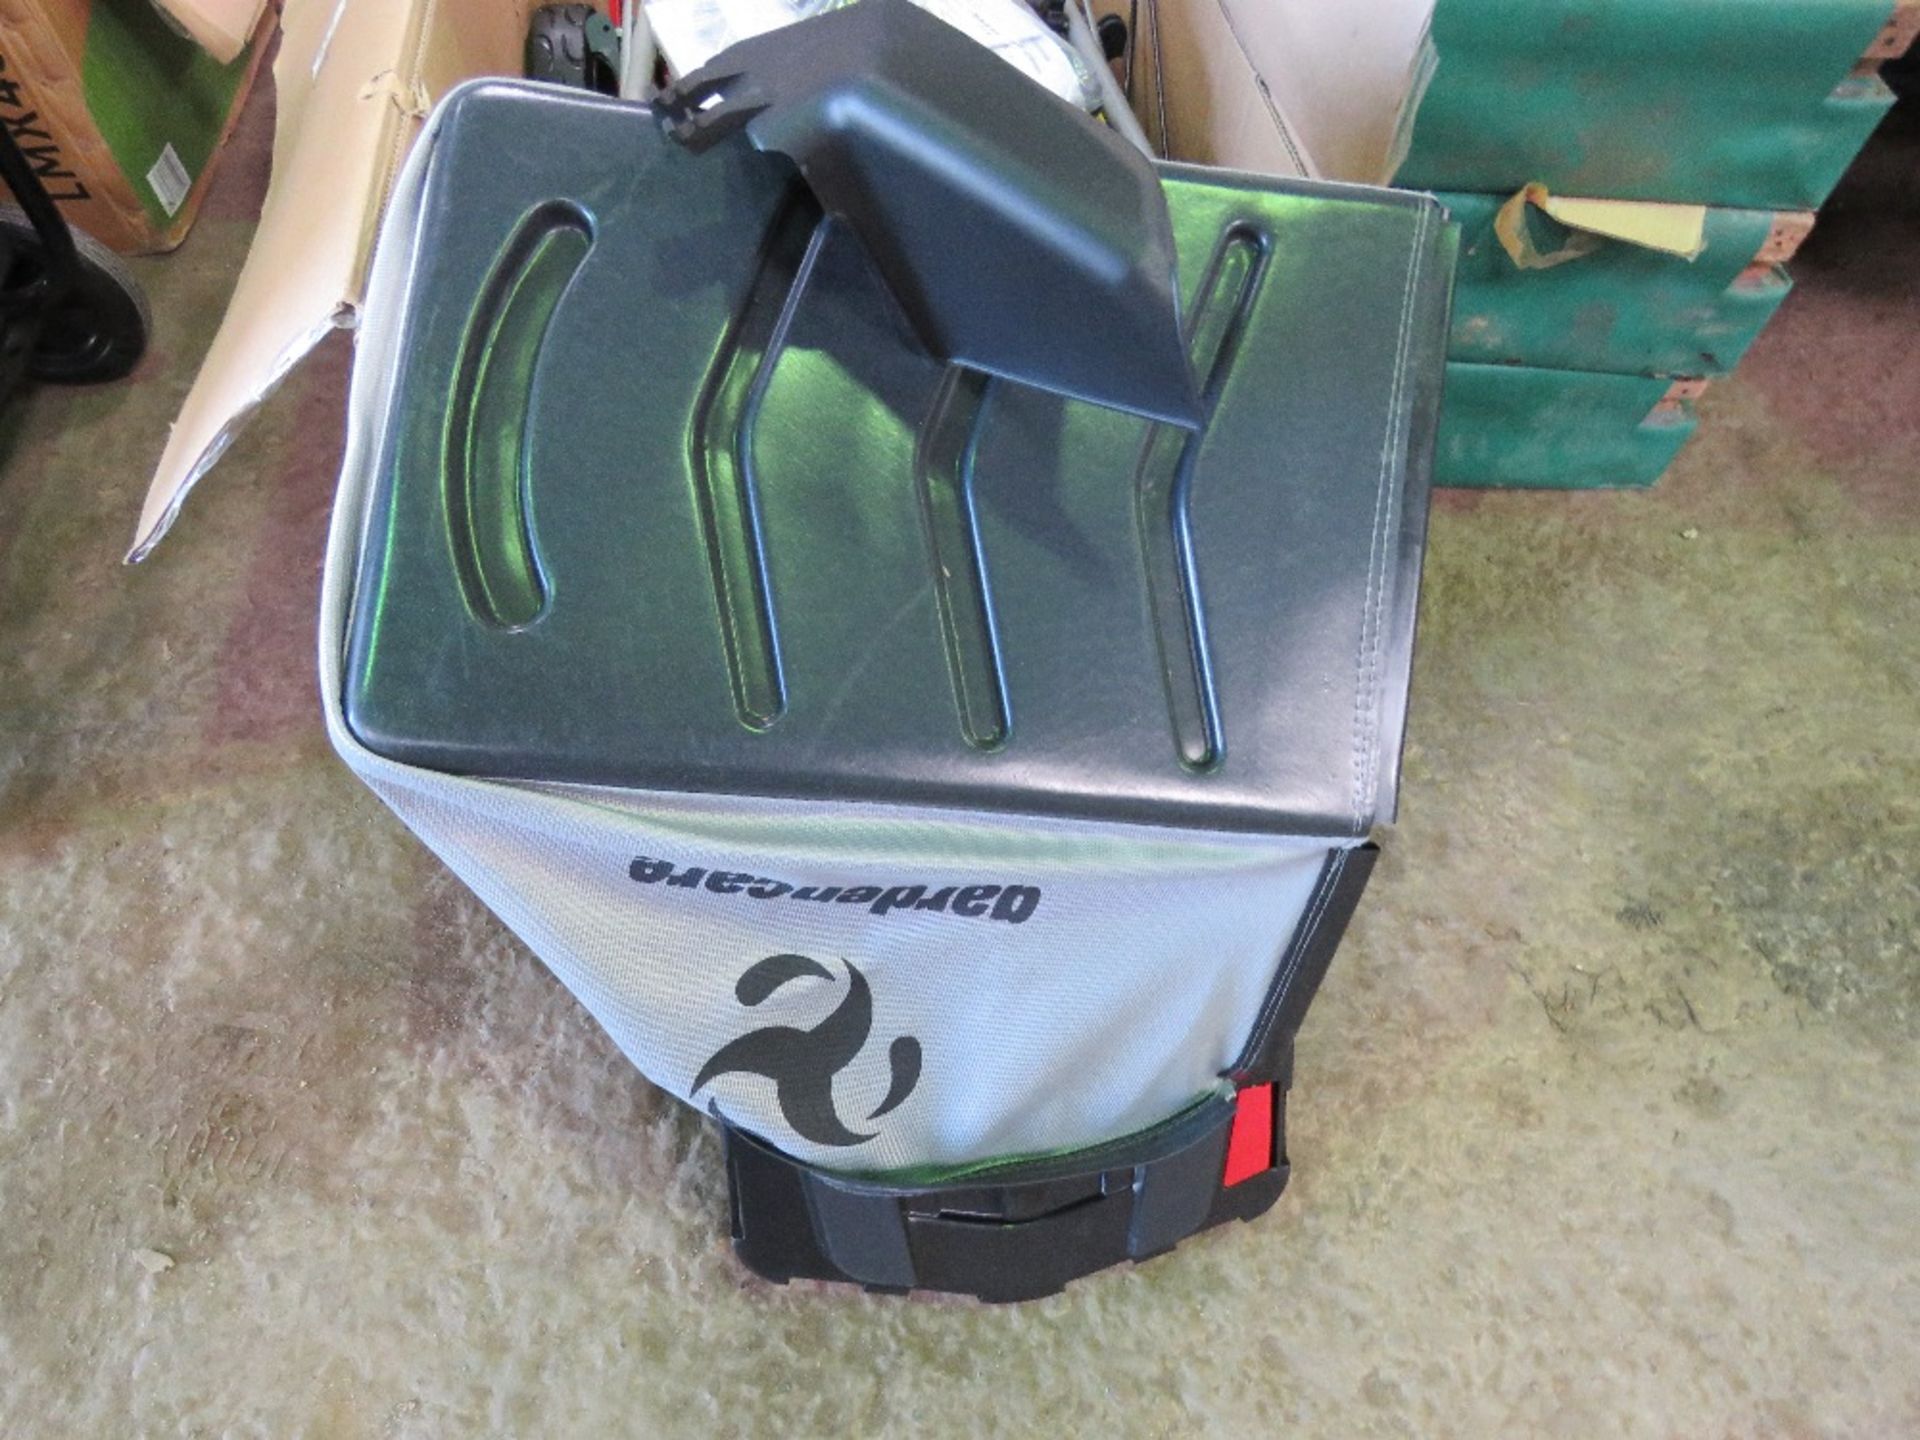 GARDENCARE LMX46P PETROL ENGINED MOWER, UNUSED IN A BOX. - Image 6 of 8